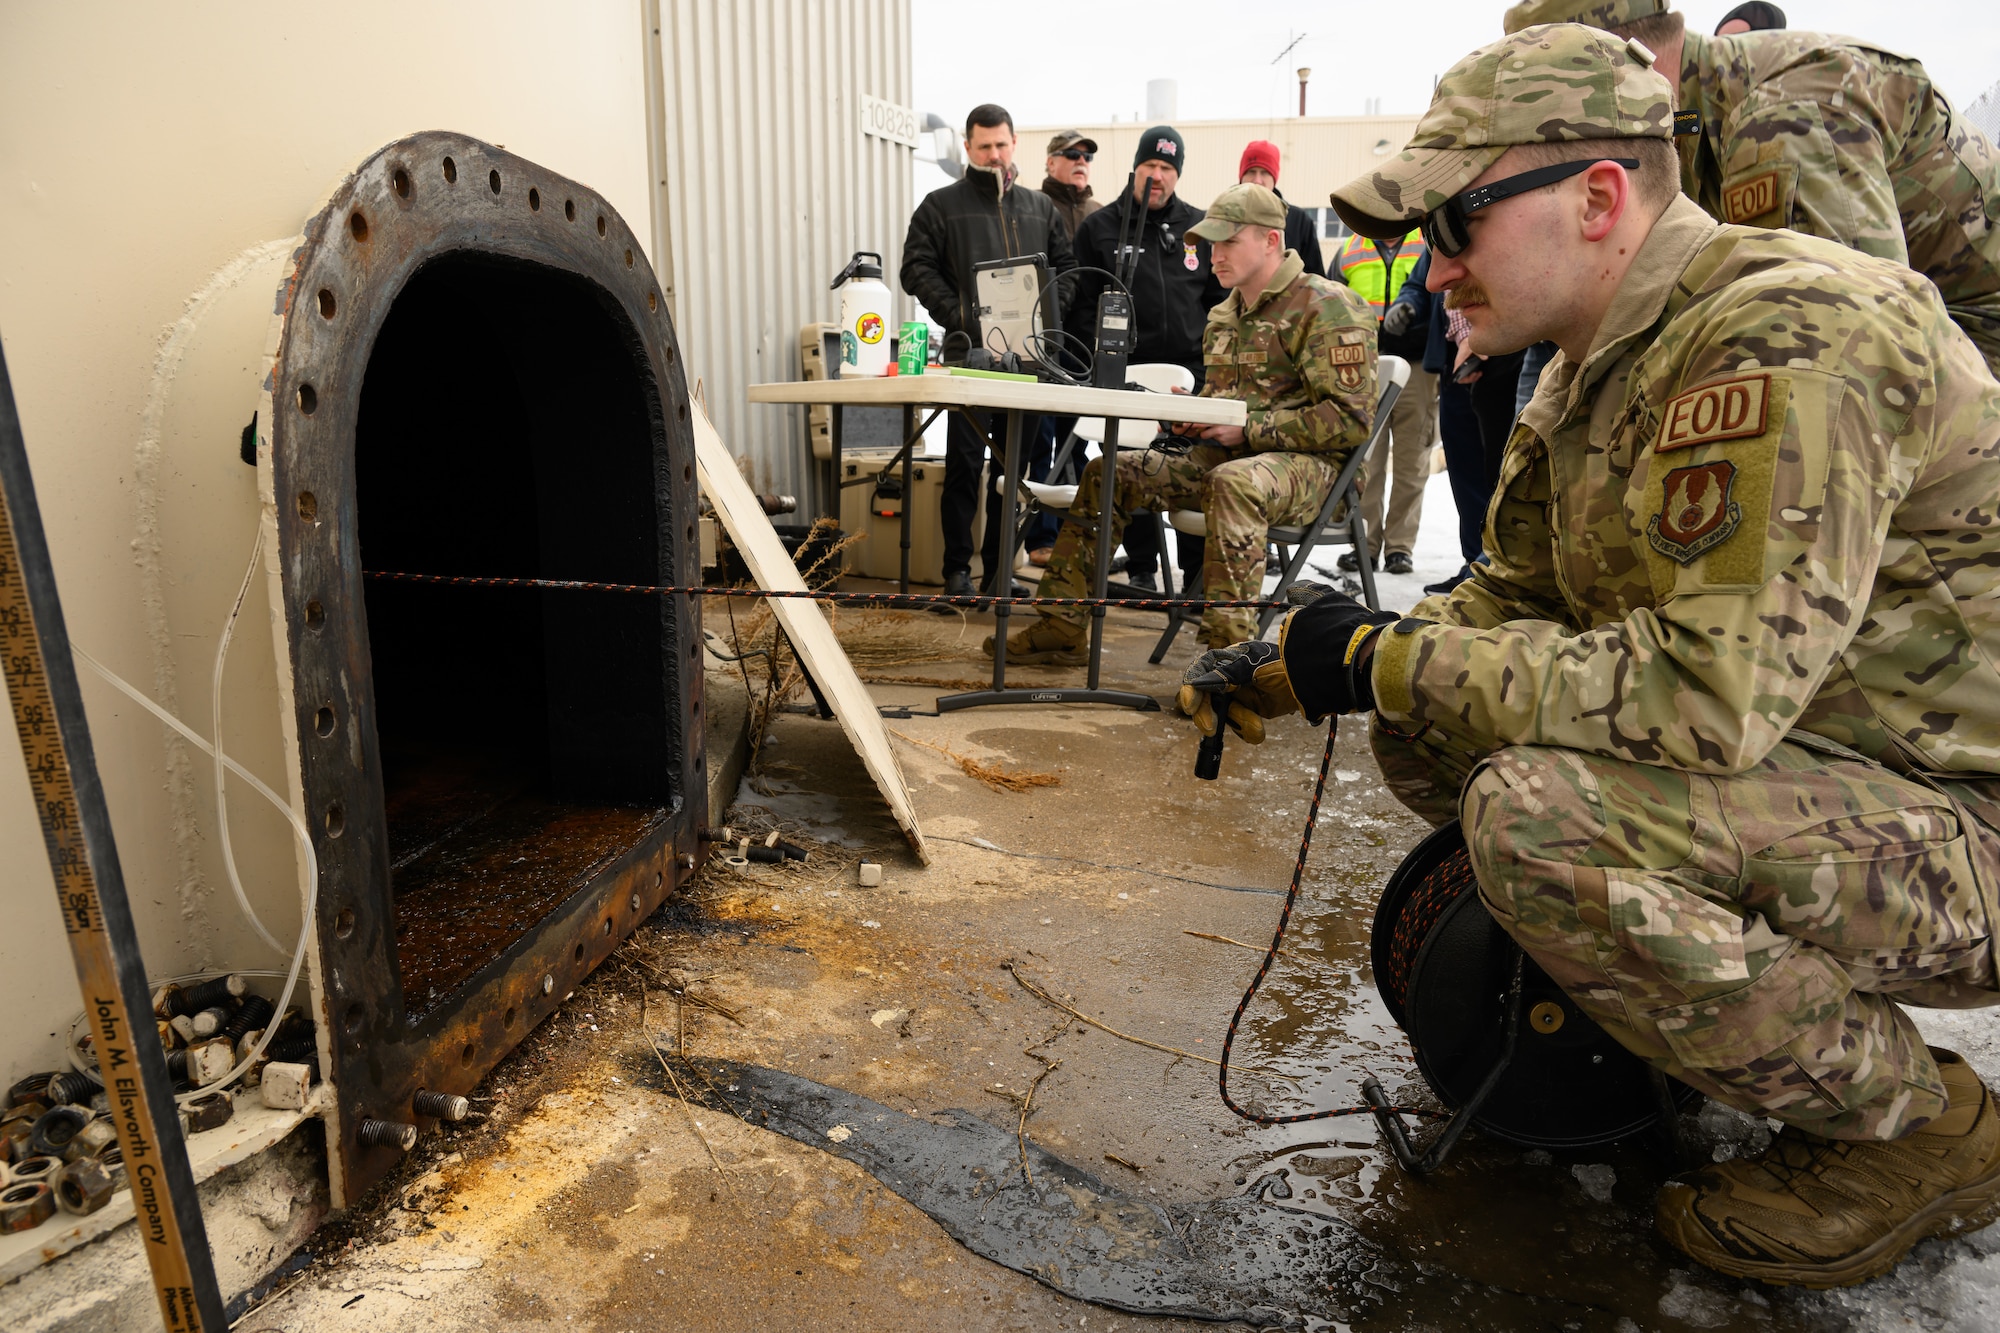 An airman looks into the manhole of a fuel tank